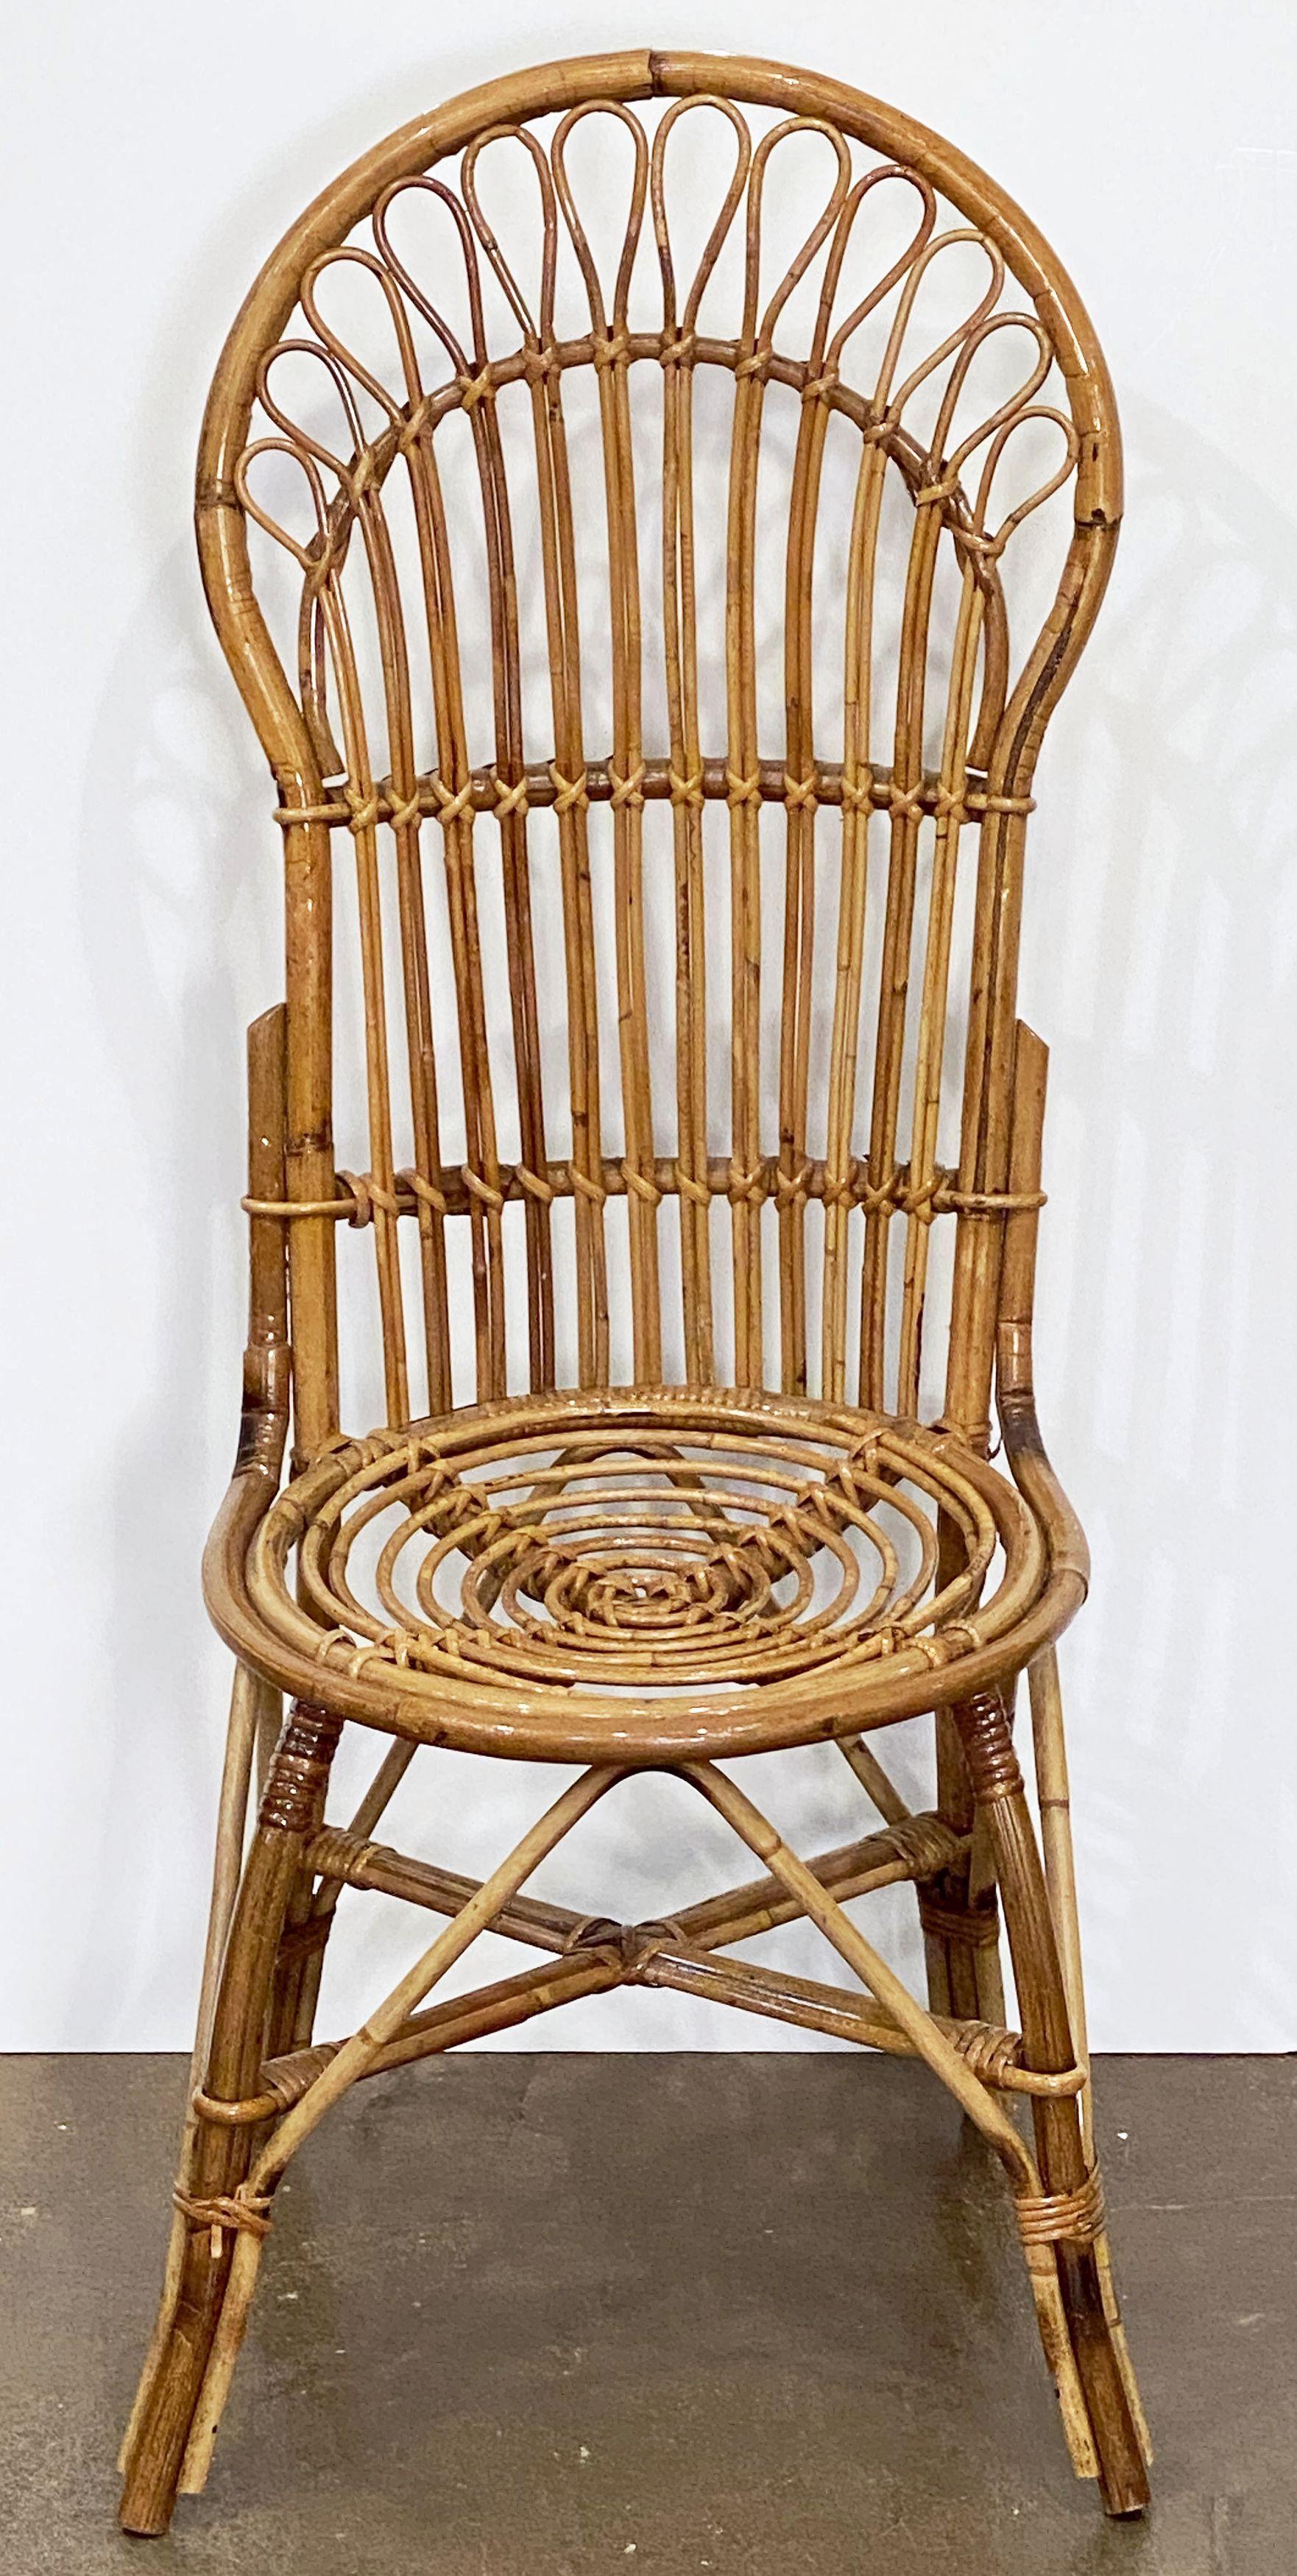 Italian Fan-Backed Chair of Rattan and Bamboo from the Mid-20th Century In Good Condition For Sale In Austin, TX